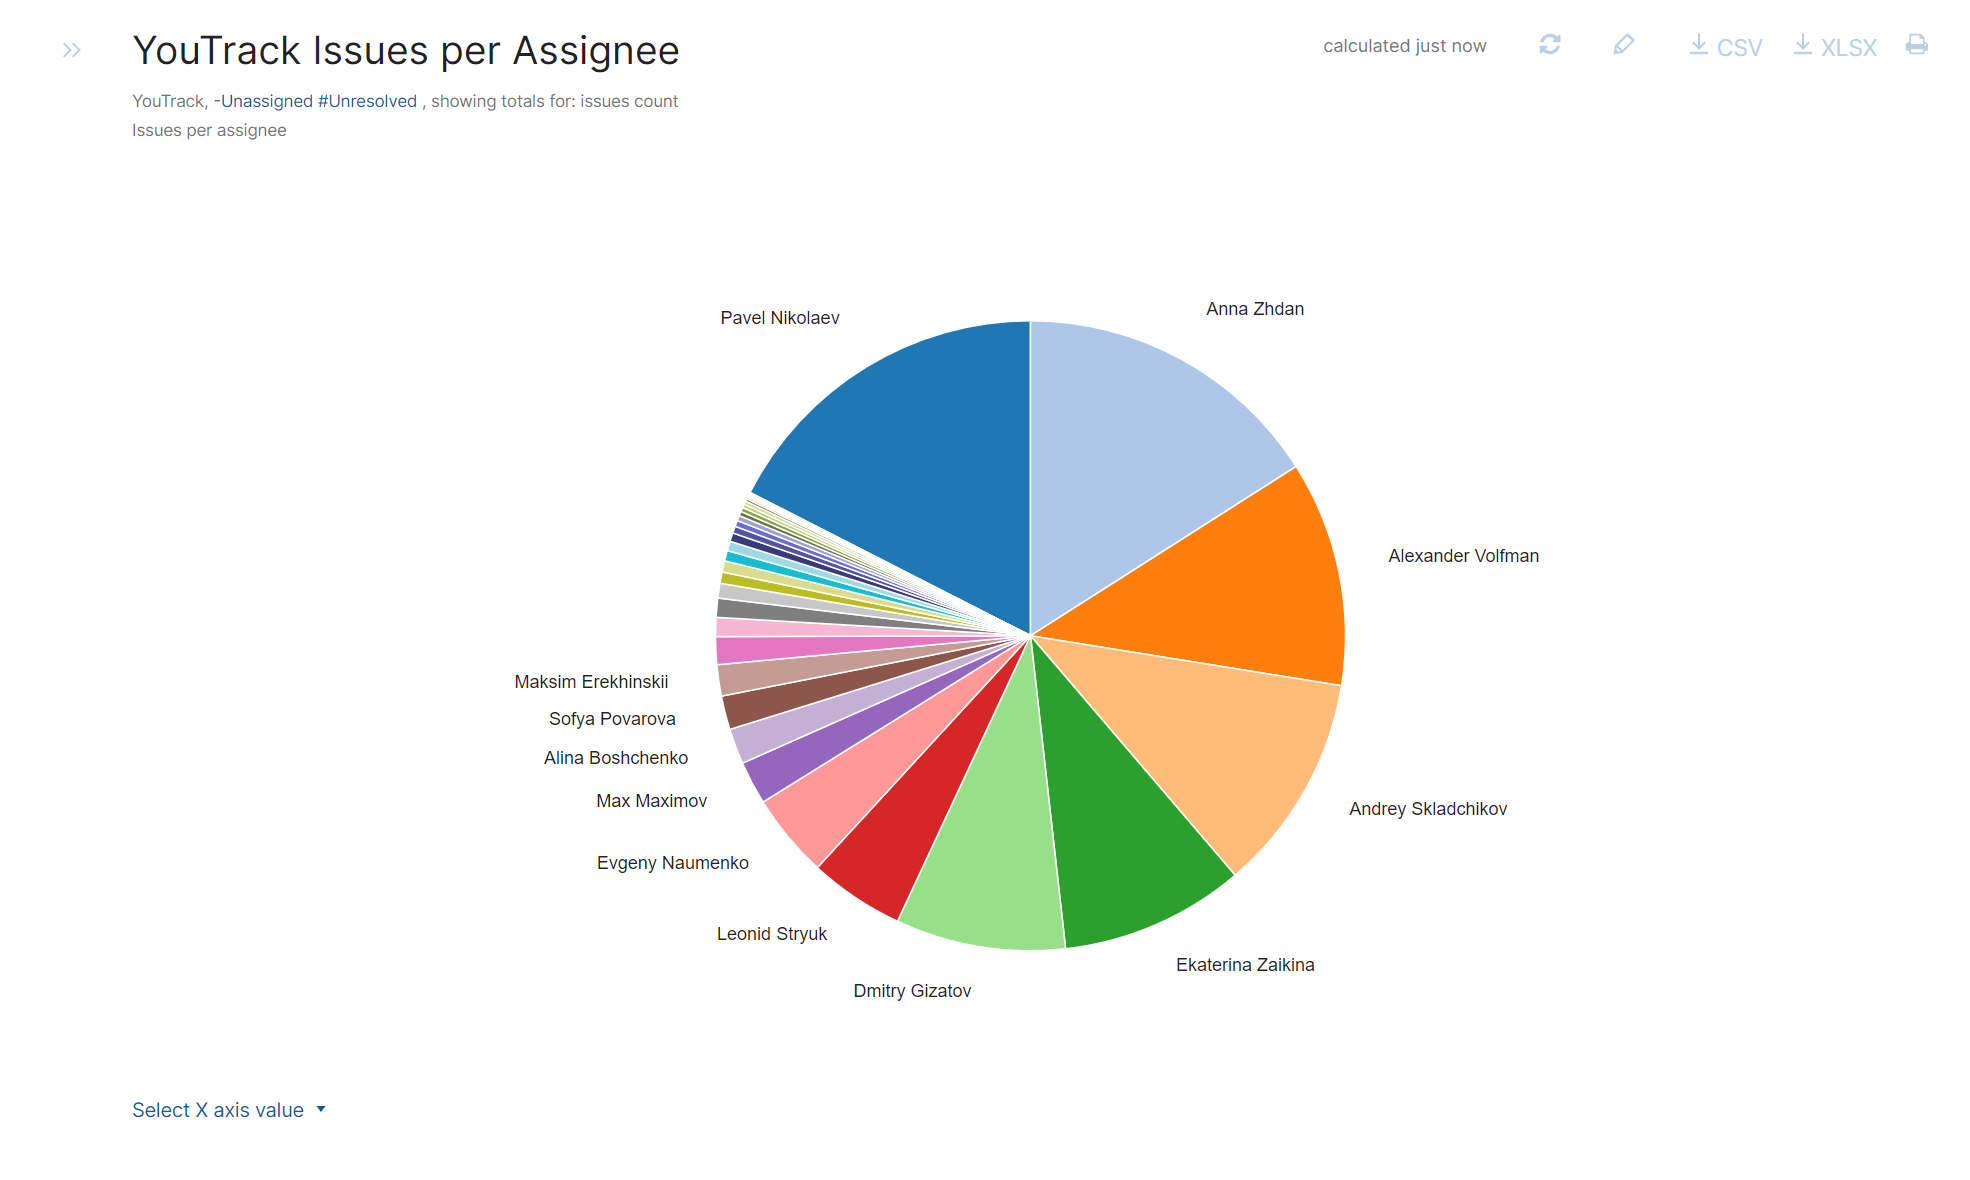 Issues per assignee